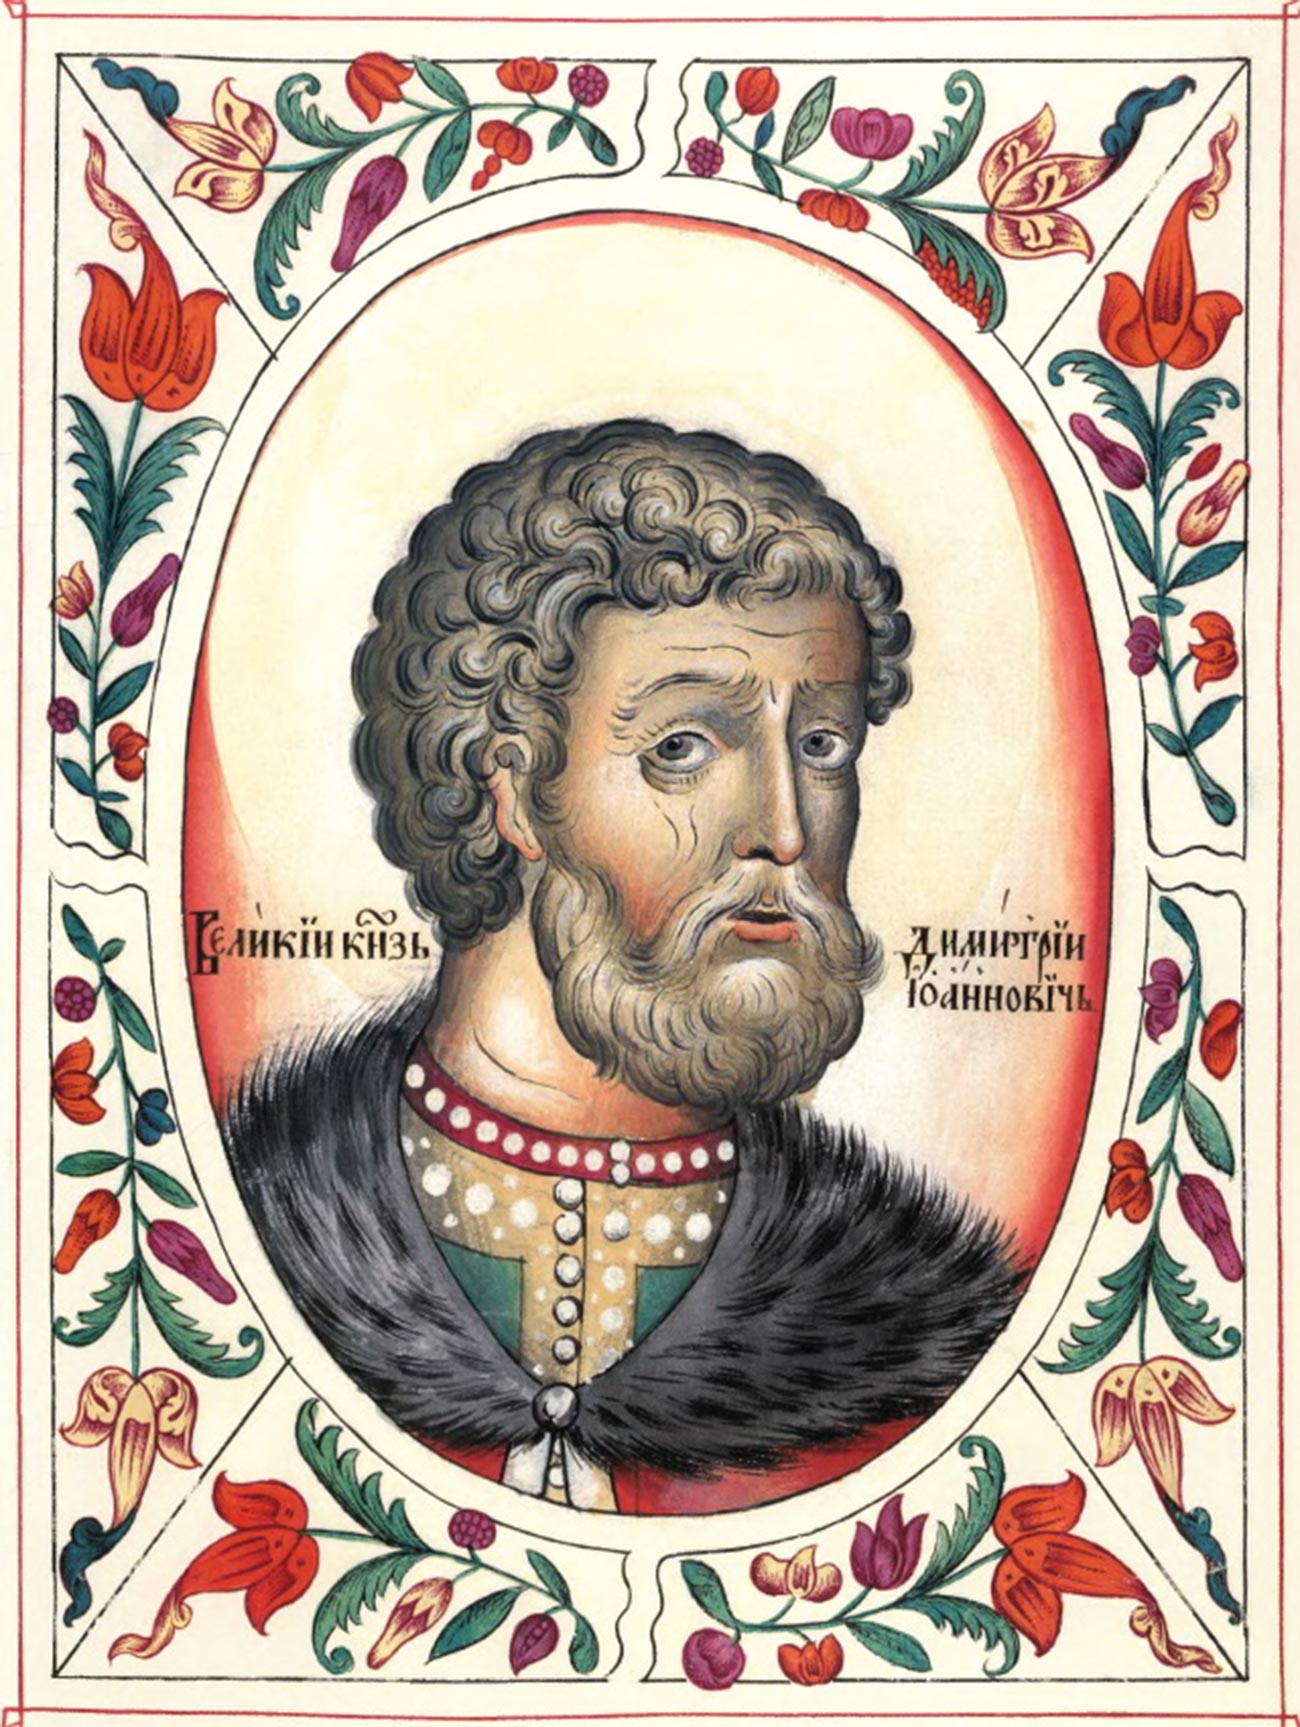 Dmitry Donskoy, an image from a Russian chronicle